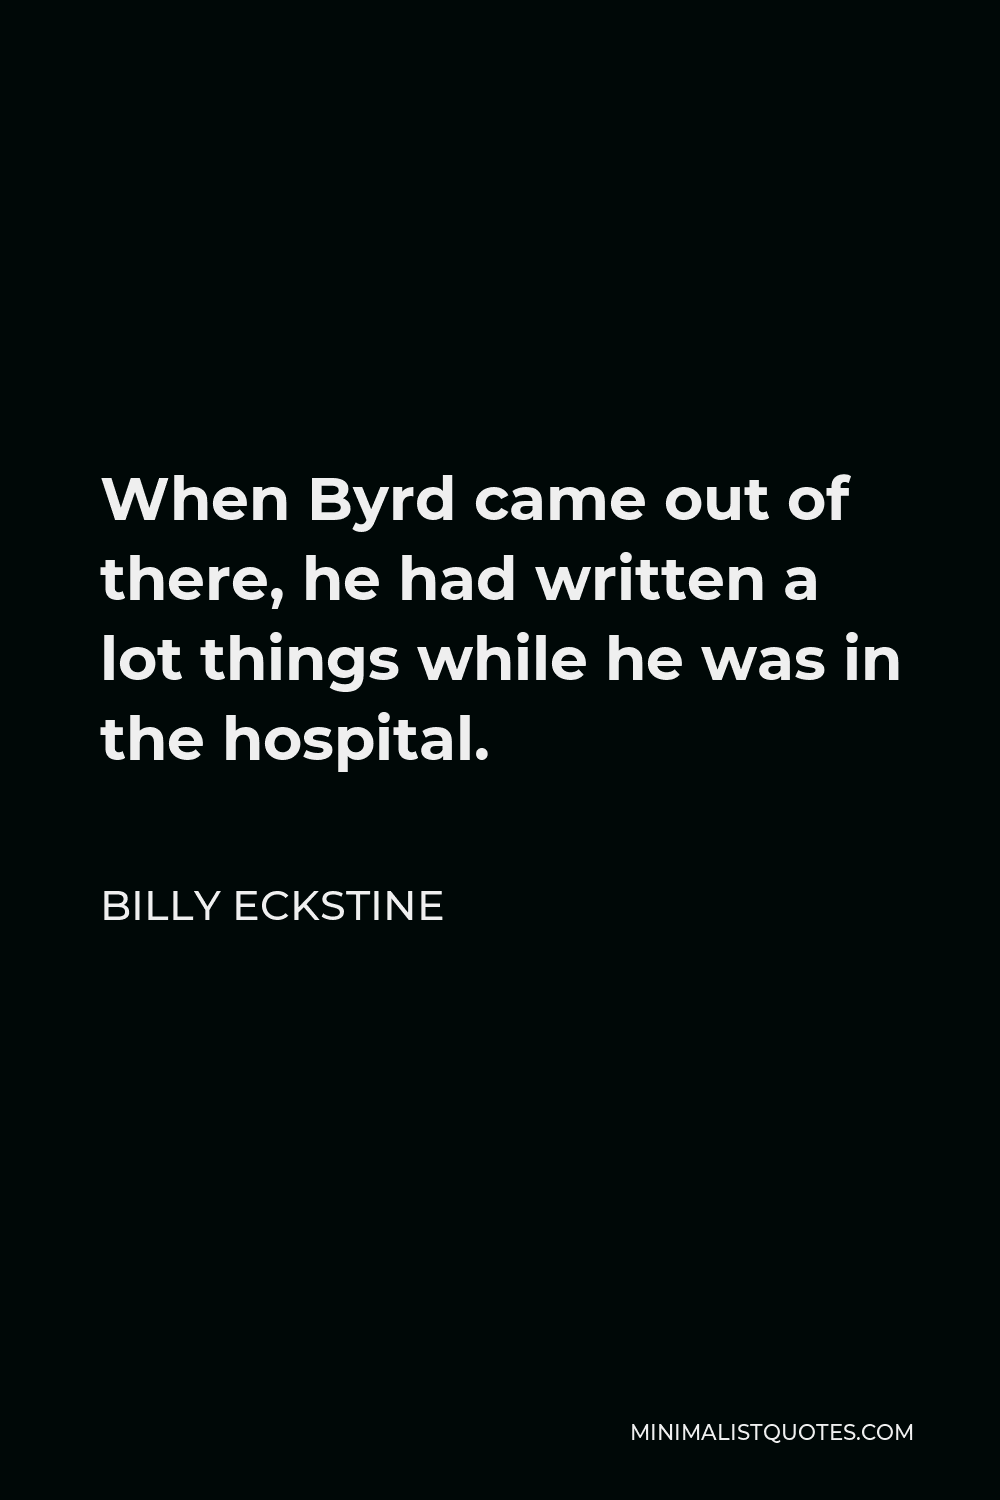 Billy Eckstine Quote - When Byrd came out of there, he had written a lot things while he was in the hospital.